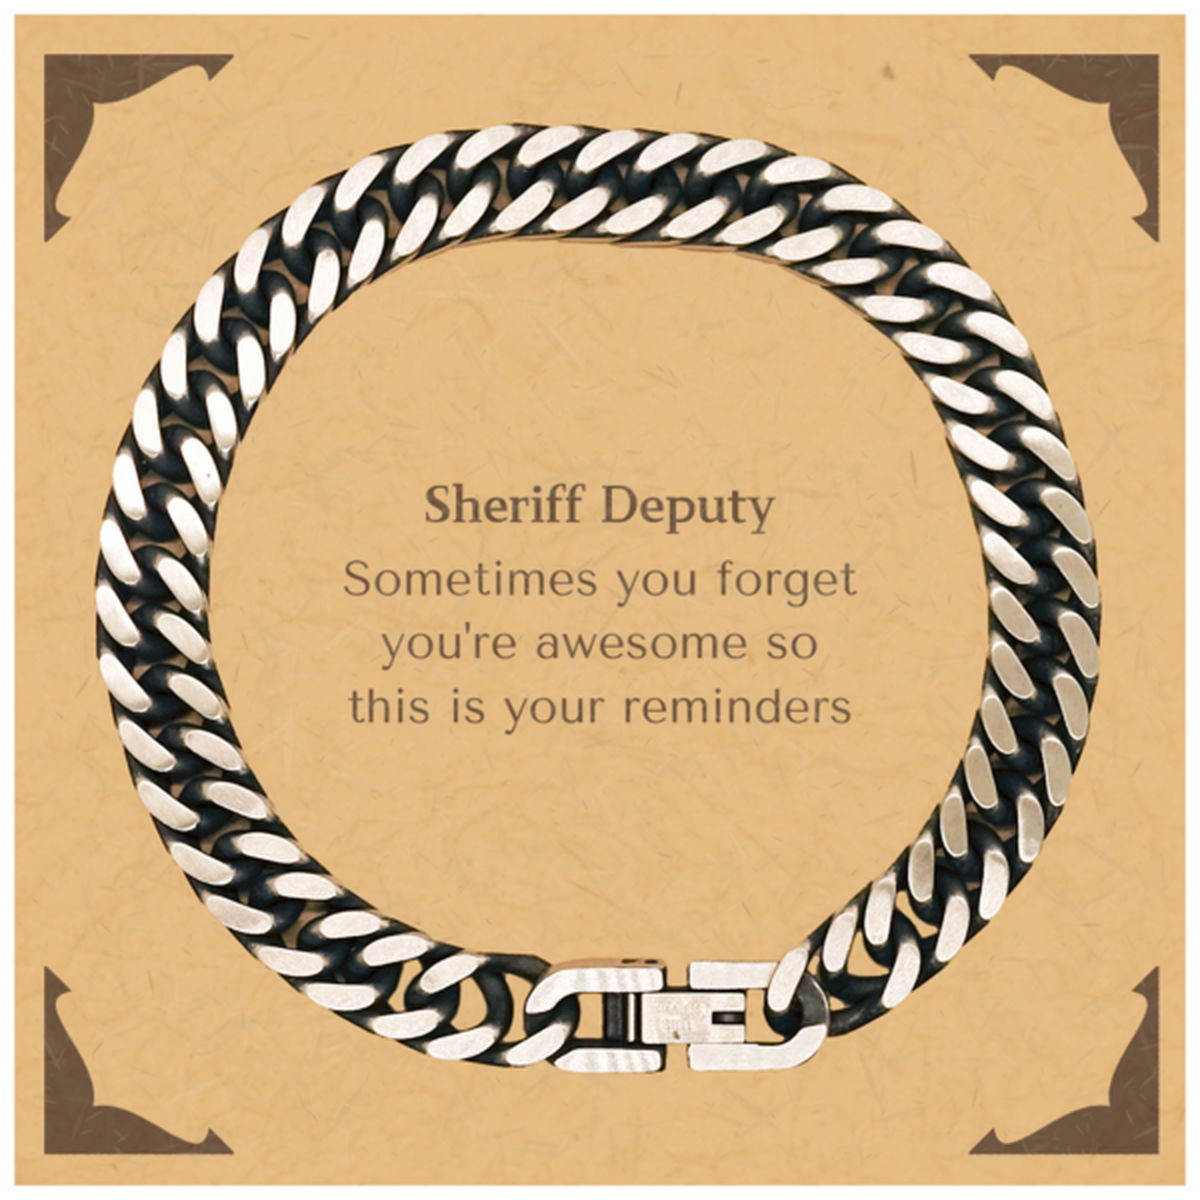 Sentimental Sheriff Deputy Cuban Link Chain Bracelet, Sheriff Deputy Sometimes you forget you're awesome so this is your reminders, Graduation Christmas Birthday Gifts for Sheriff Deputy, Men, Women, Coworkers